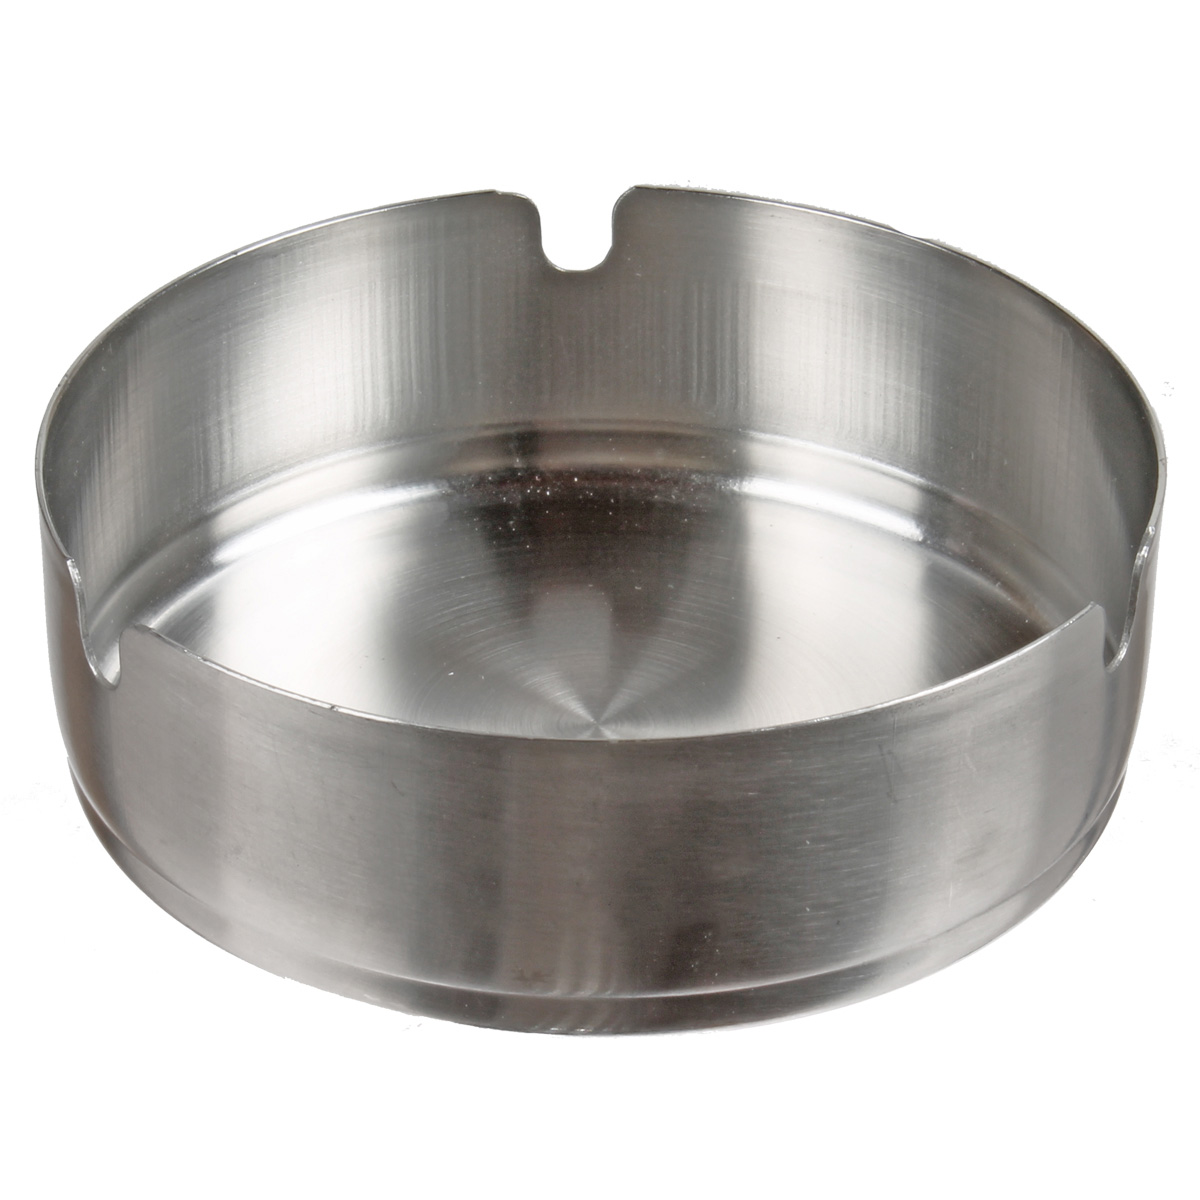 Stainless Steel Steel Ash Tray